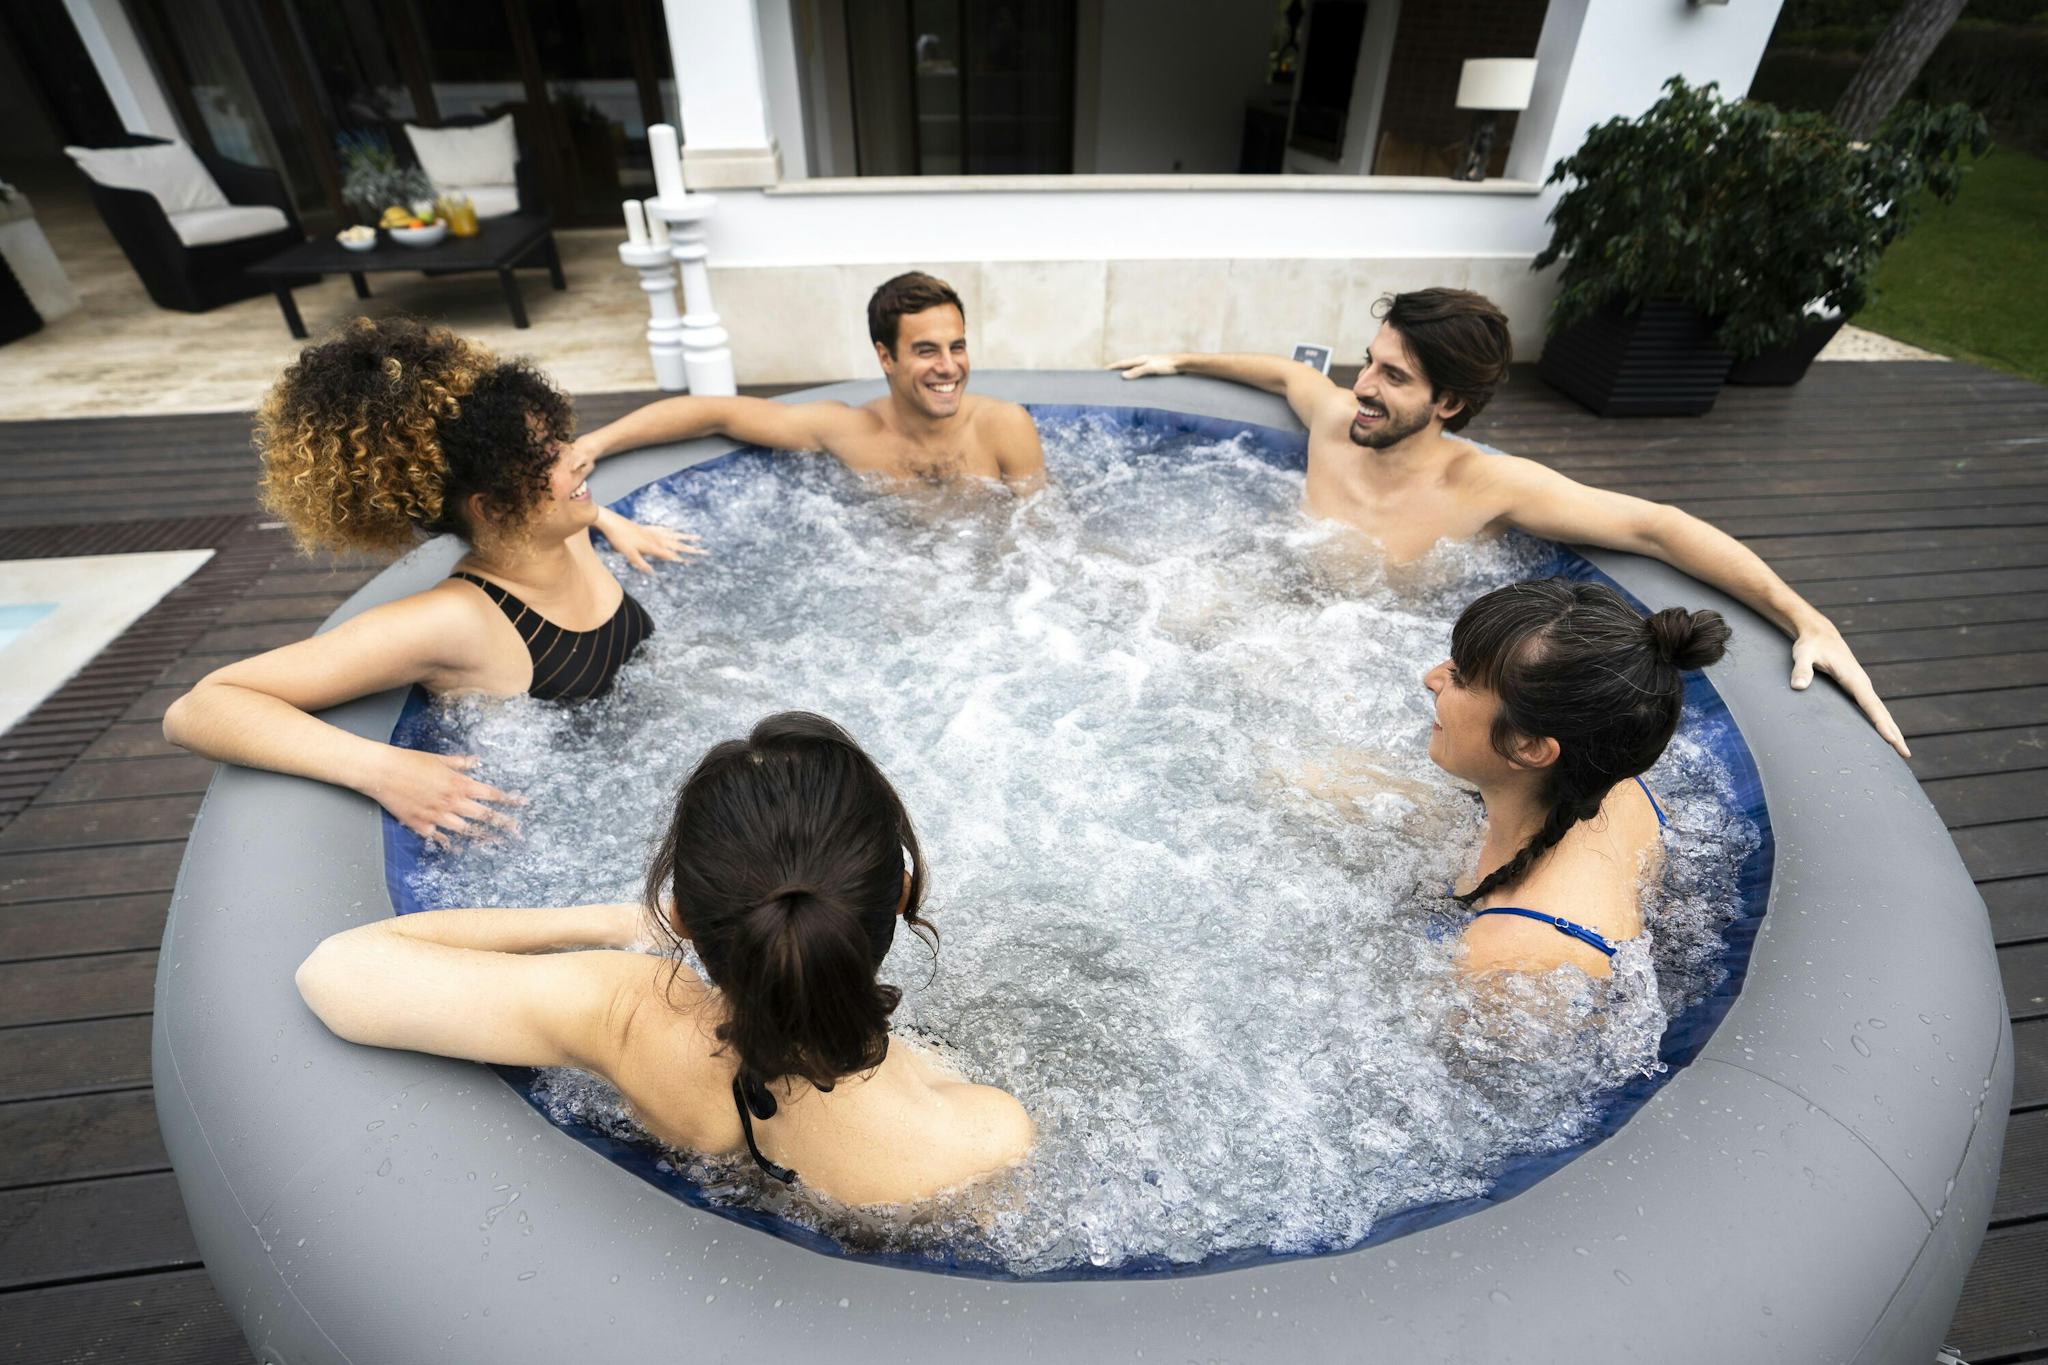 Spas Gonflables Spa gonflable rond Lay-Z-Spa Santorini Hydrojet pro™ 5 - 7 personnes Bestway 16